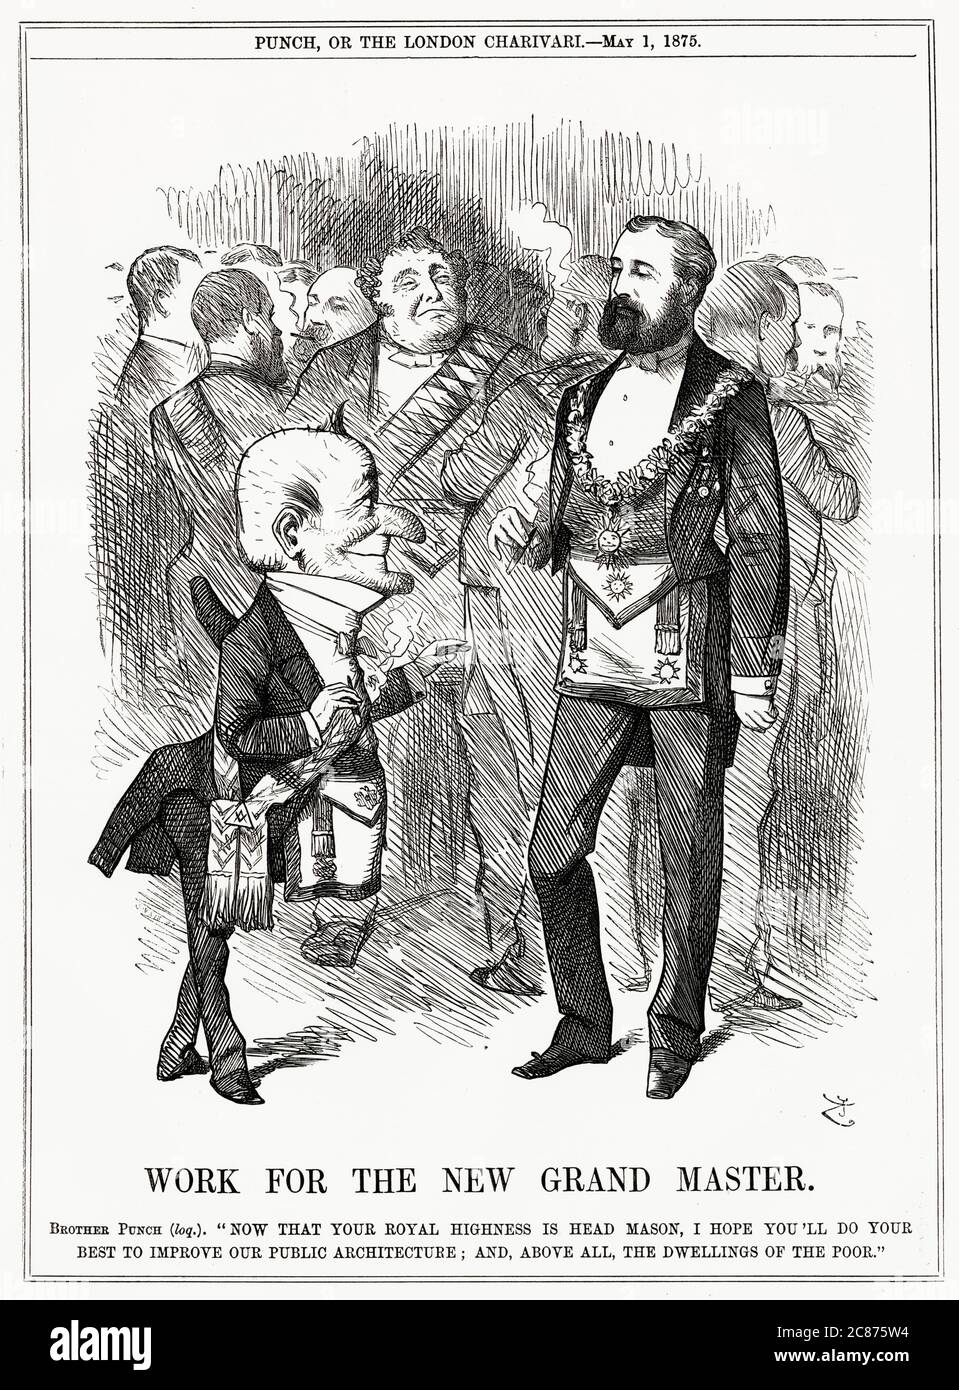 Cartoon, EDWARD, Prince of Wales, as Masonic Grand Master - Mr Punch hopes for an improvement to public architecture, especially the dwellings of the poor. Stock Photo